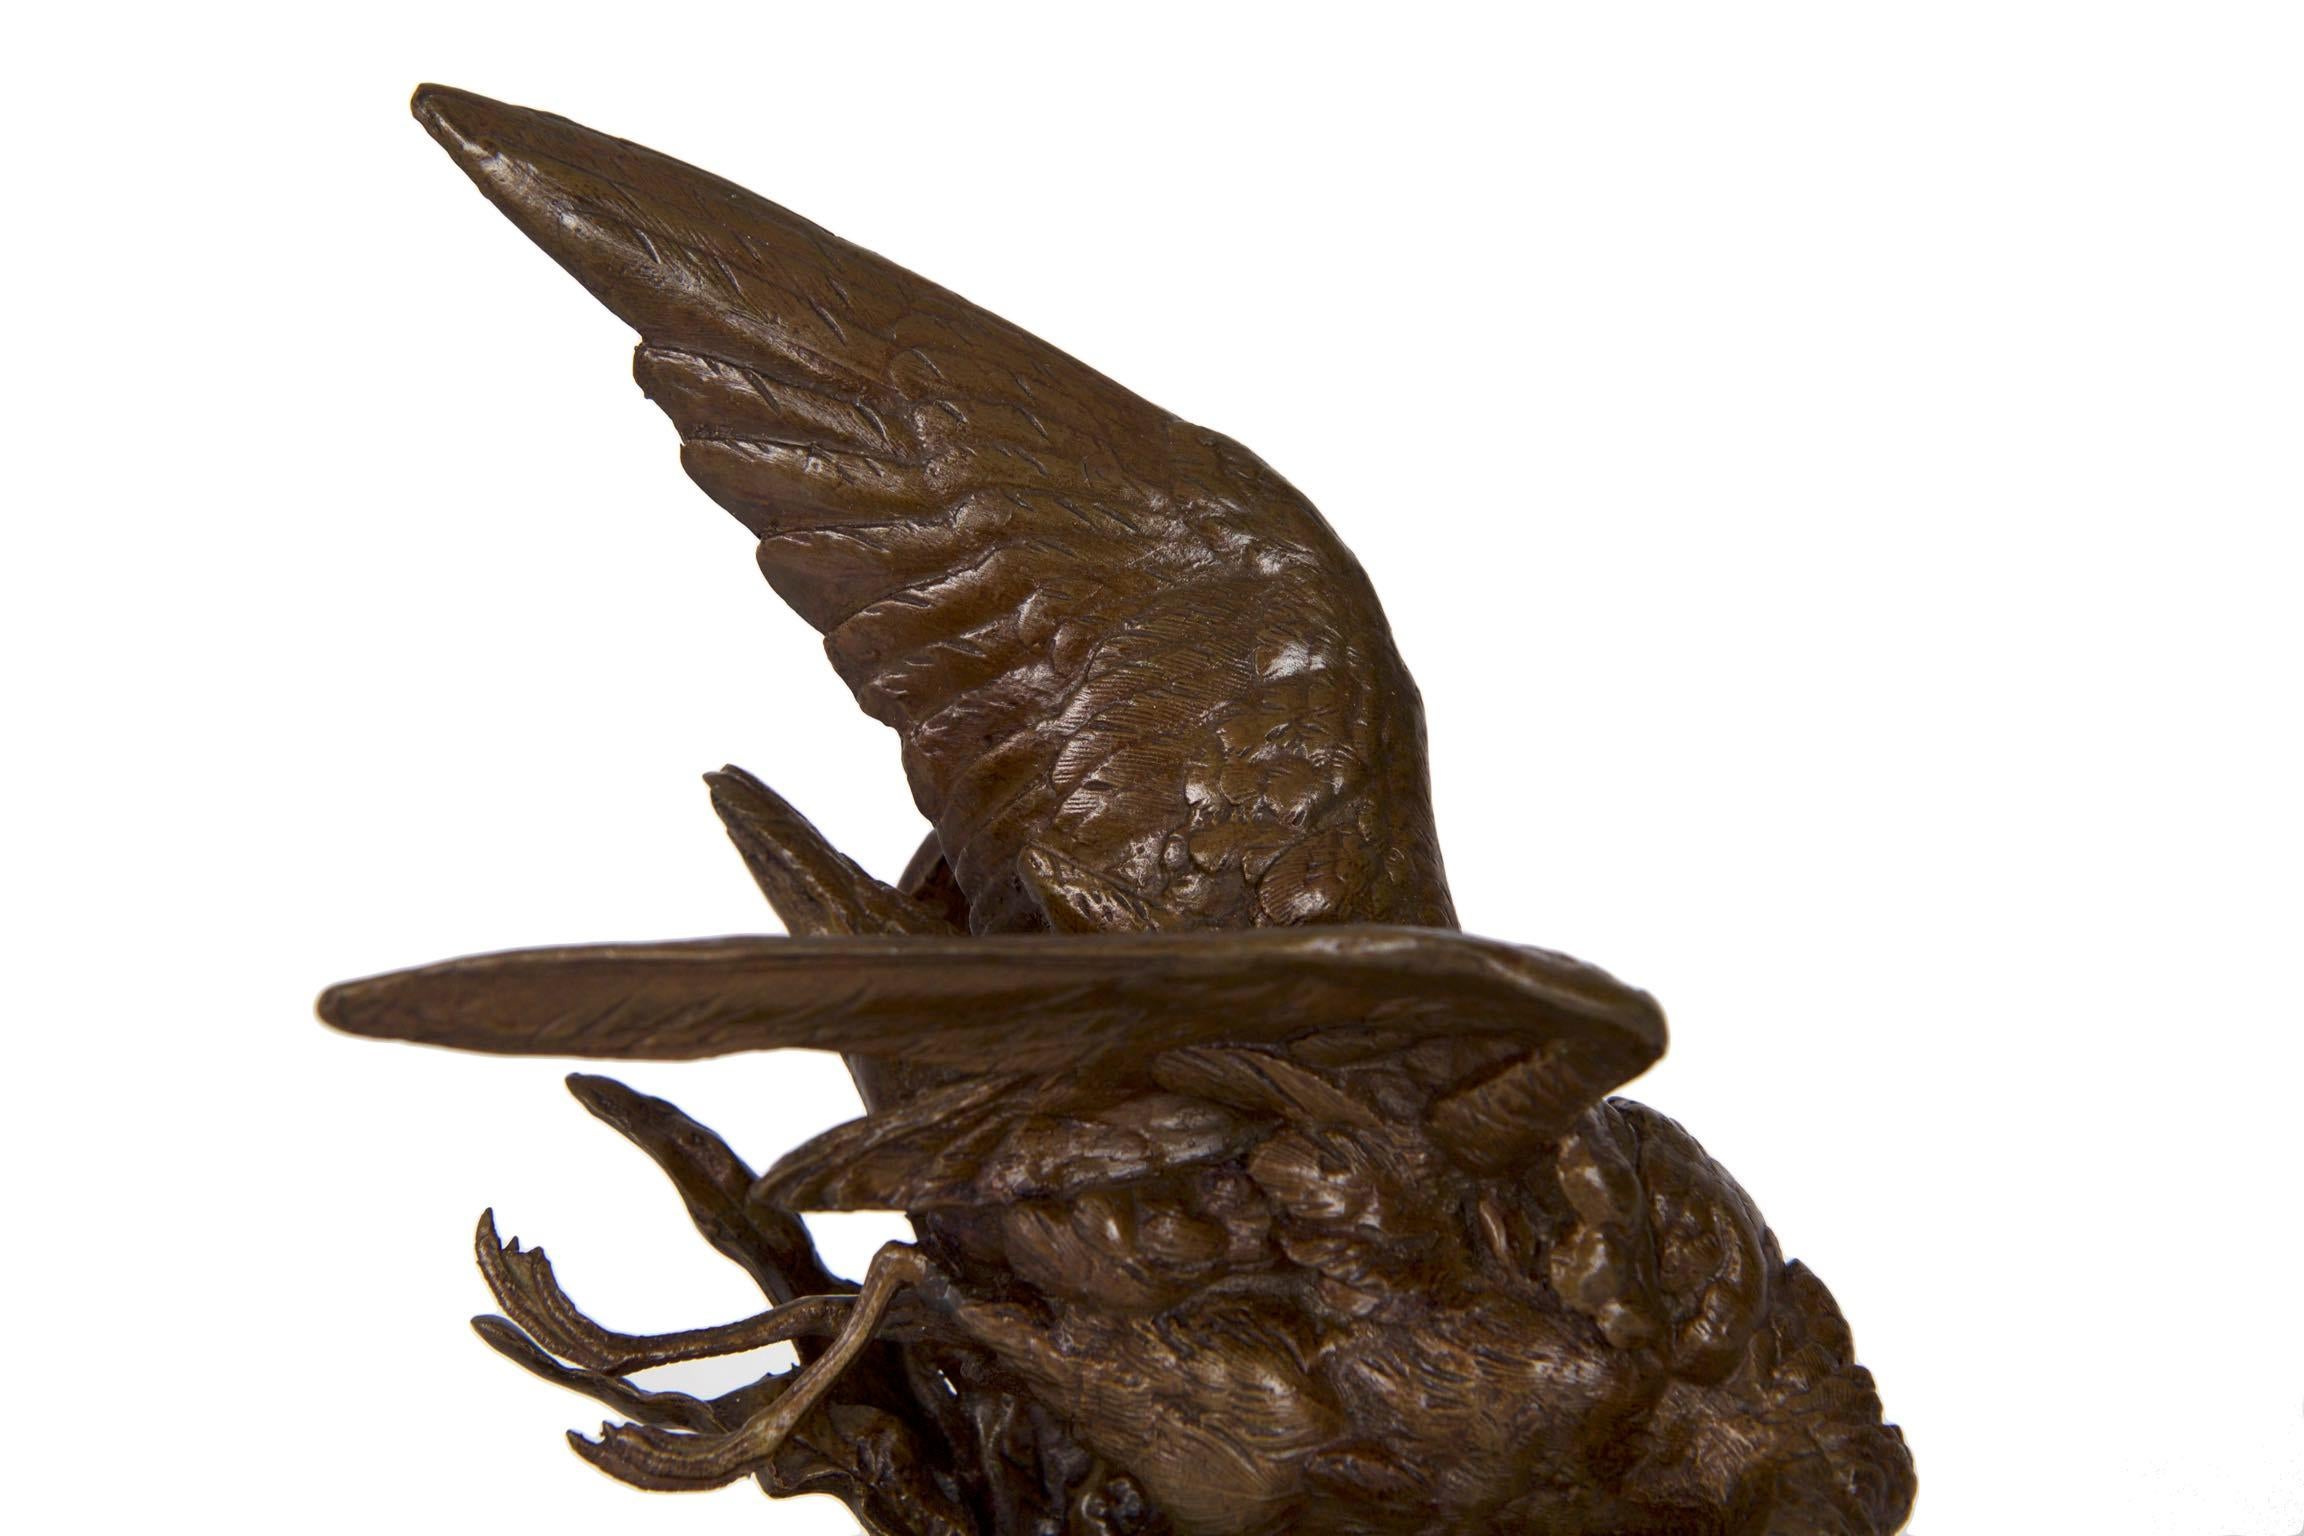 Exquisitely chiseled and cast, as is almost always the case with lifetime works by Moigniez, this fine cabinet bronze is full of life and motion. As the sandpiper flies over a variety of foliage along the water’s edge, his attention is caught by a